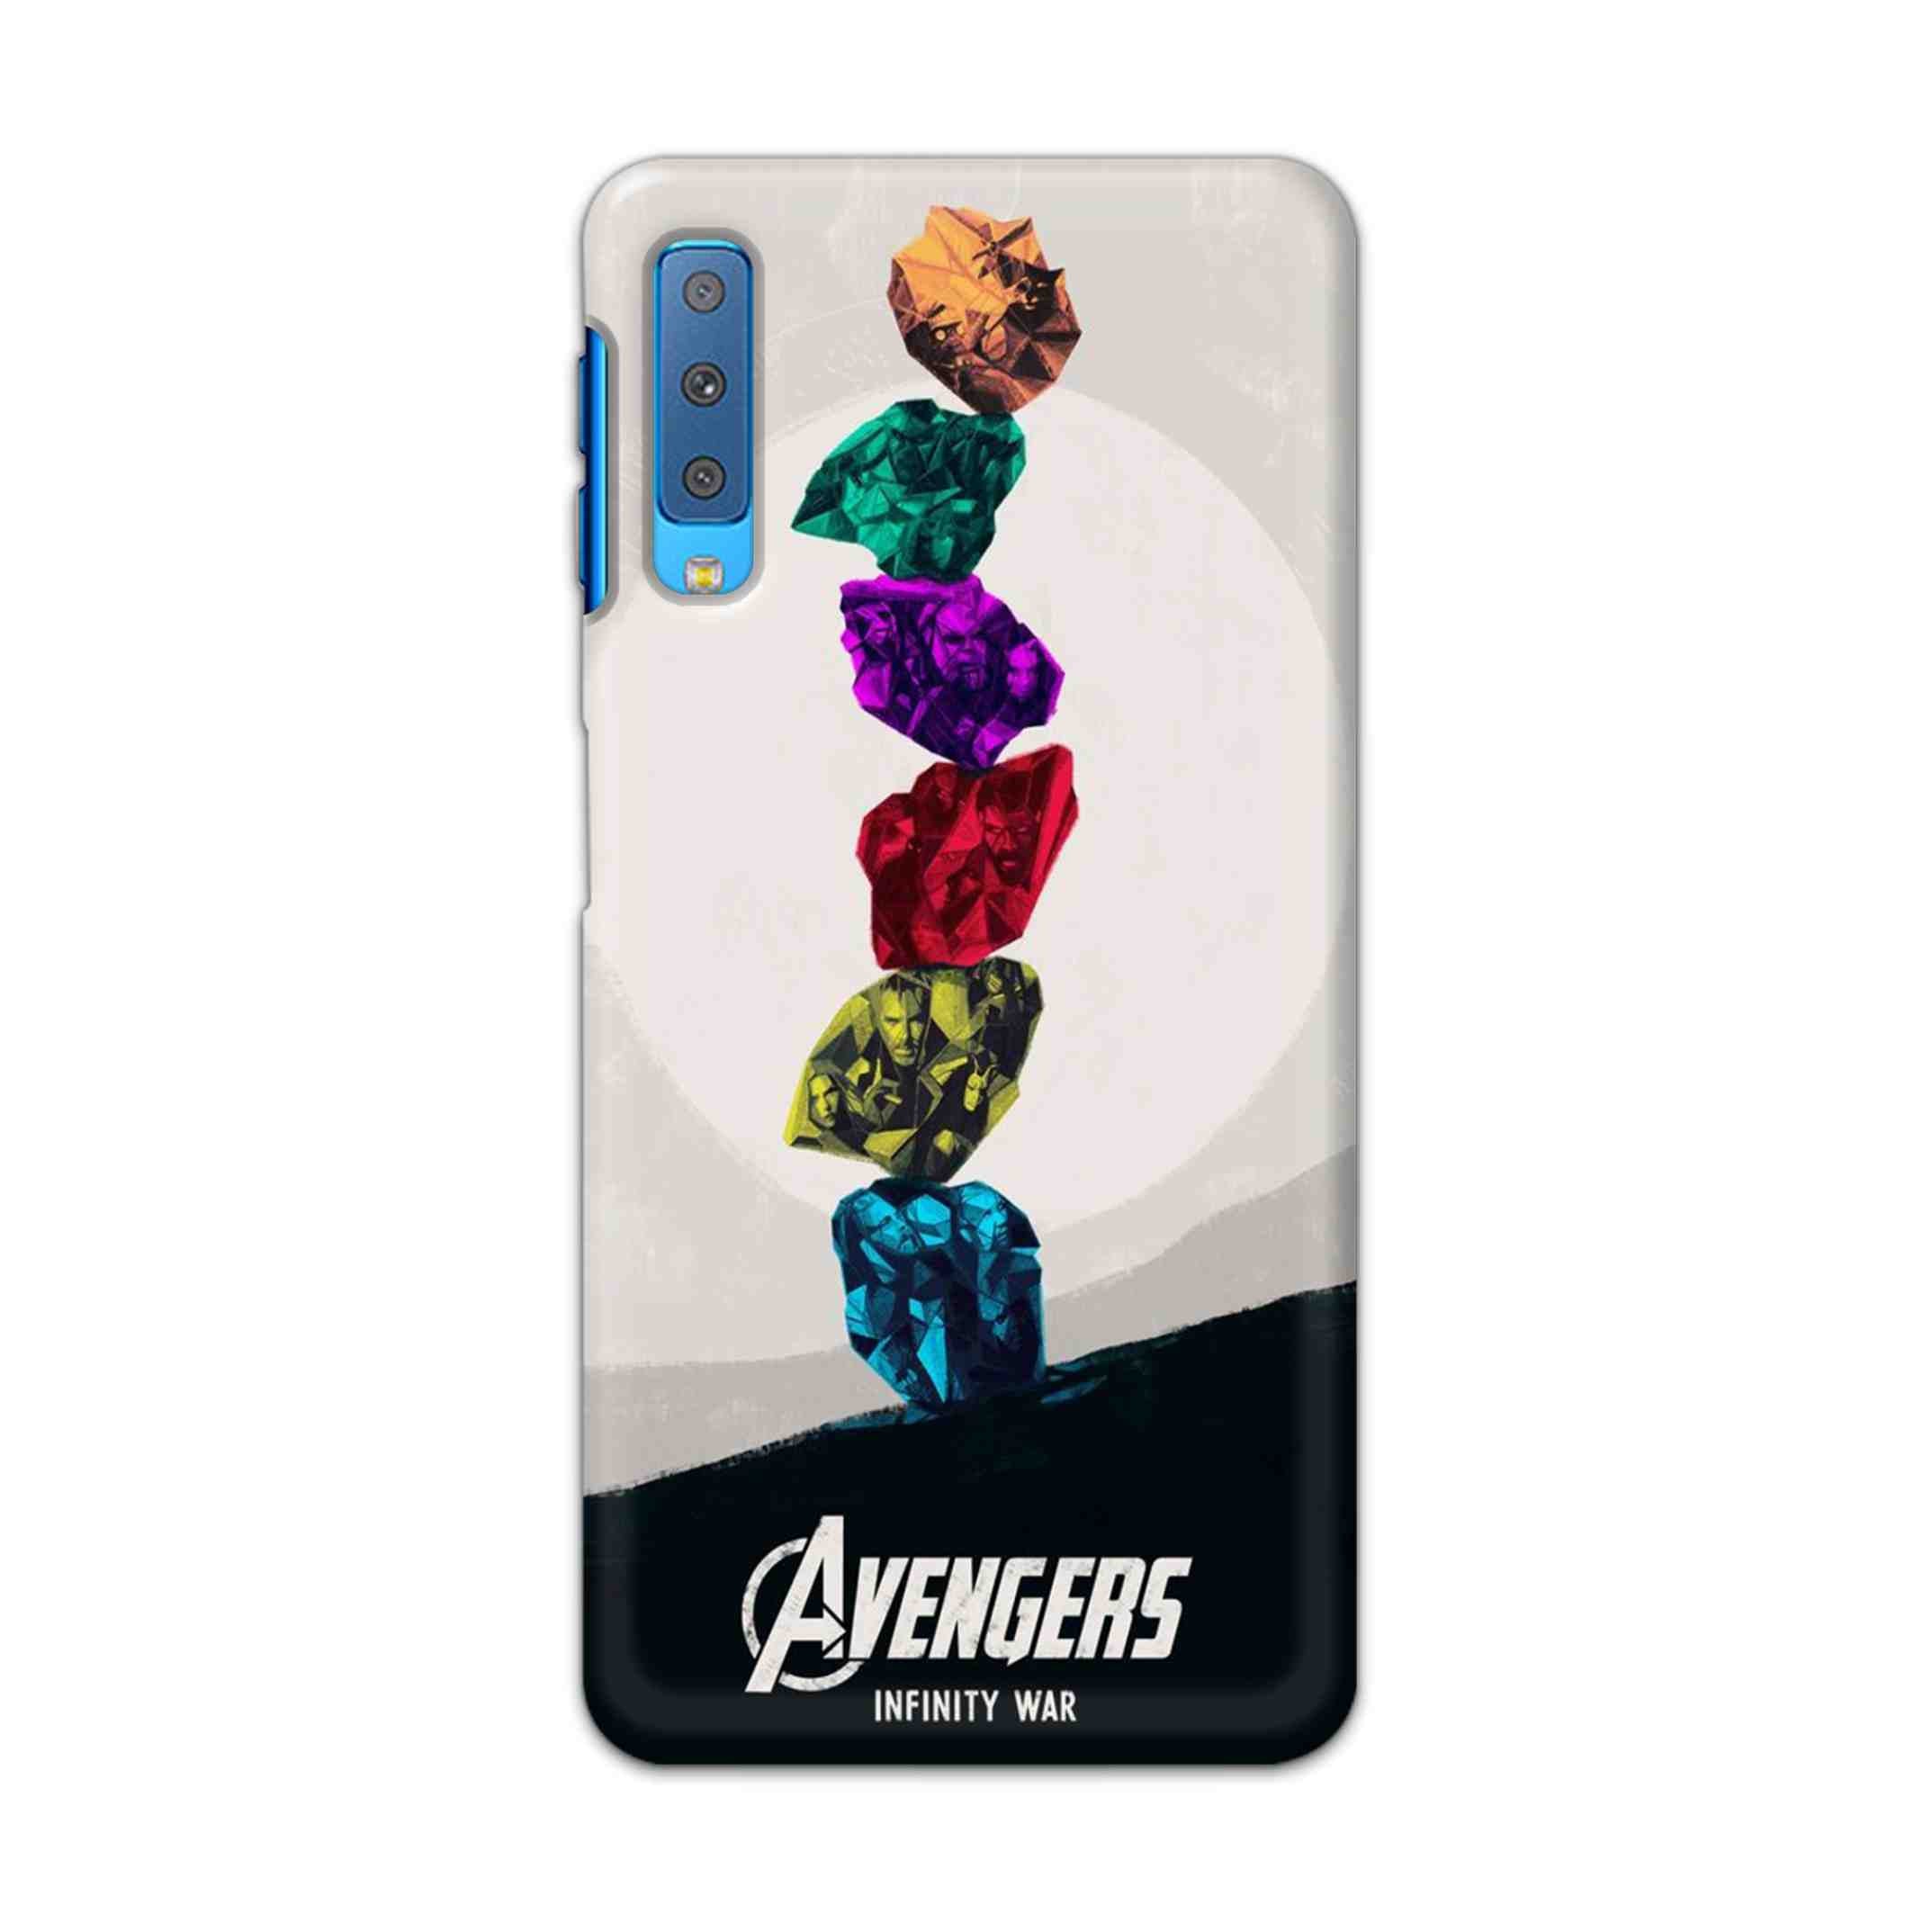 Buy Avengers Stone Hard Back Mobile Phone Case Cover For Samsung Galaxy A7 2018 Online